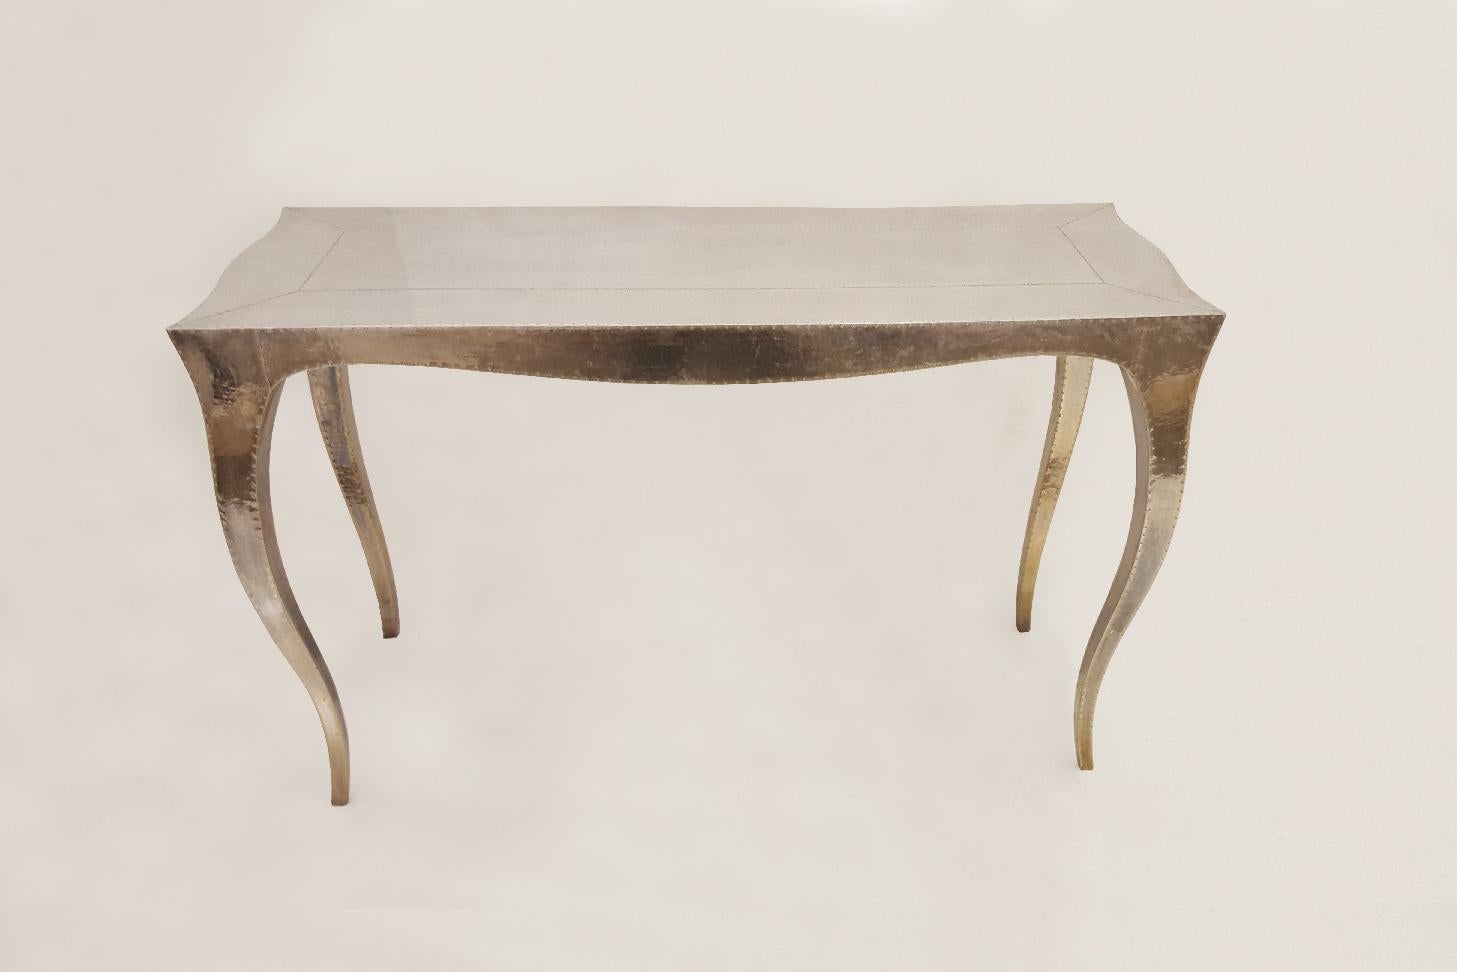 Louise Console Art Nouveau Tray Tables Mid. Hammered Brass by Paul Mathieu For Sale 5